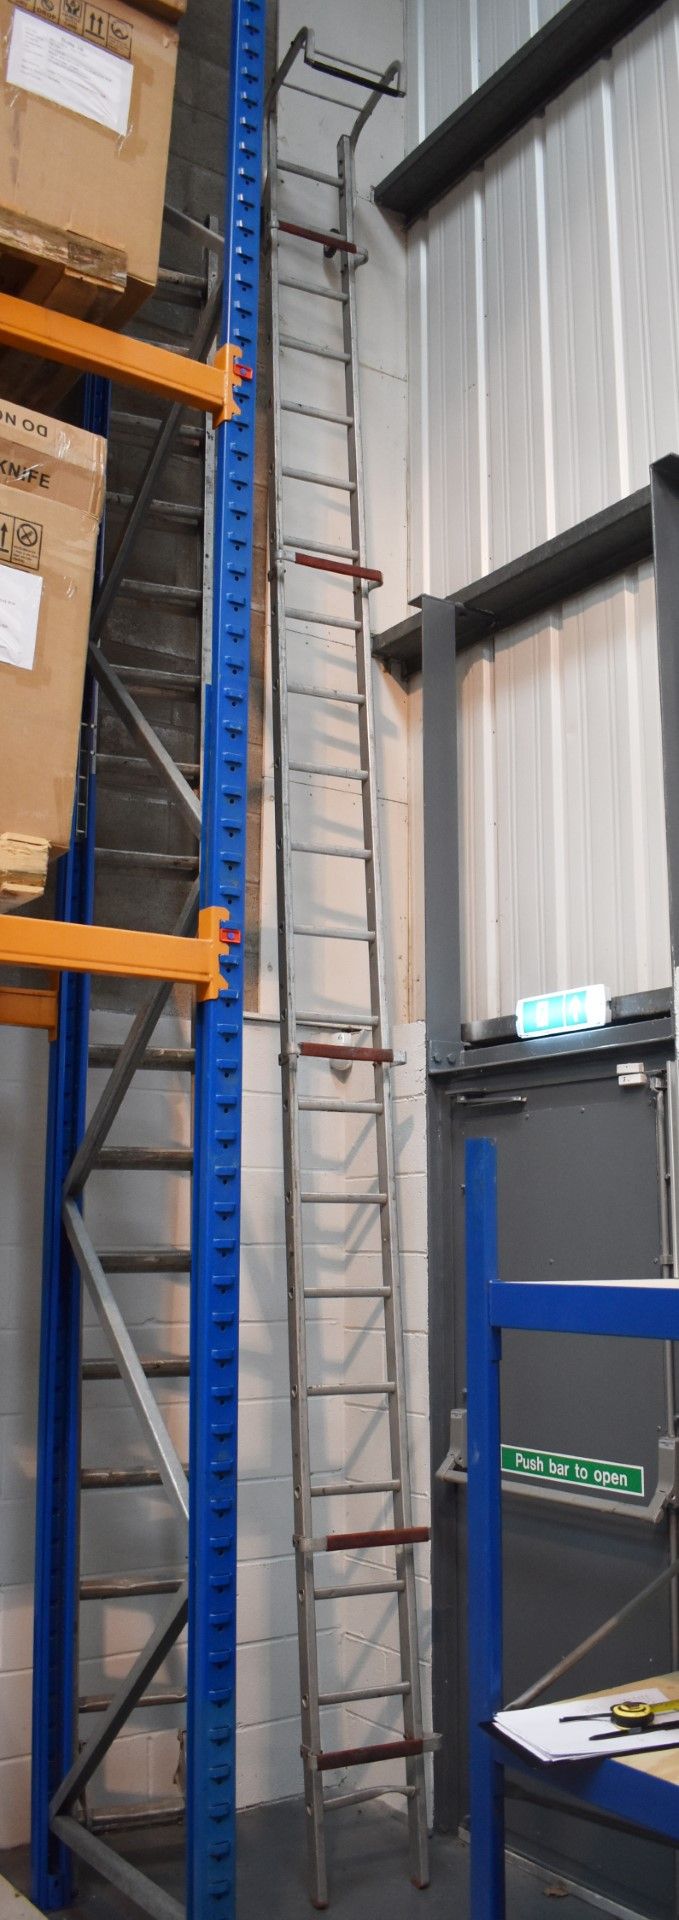 1 x Set of Single Section 18ft Roof Ladders - Approx Height 550 cms Width 31 cms - Ref 417 - CL501 - - Image 7 of 7